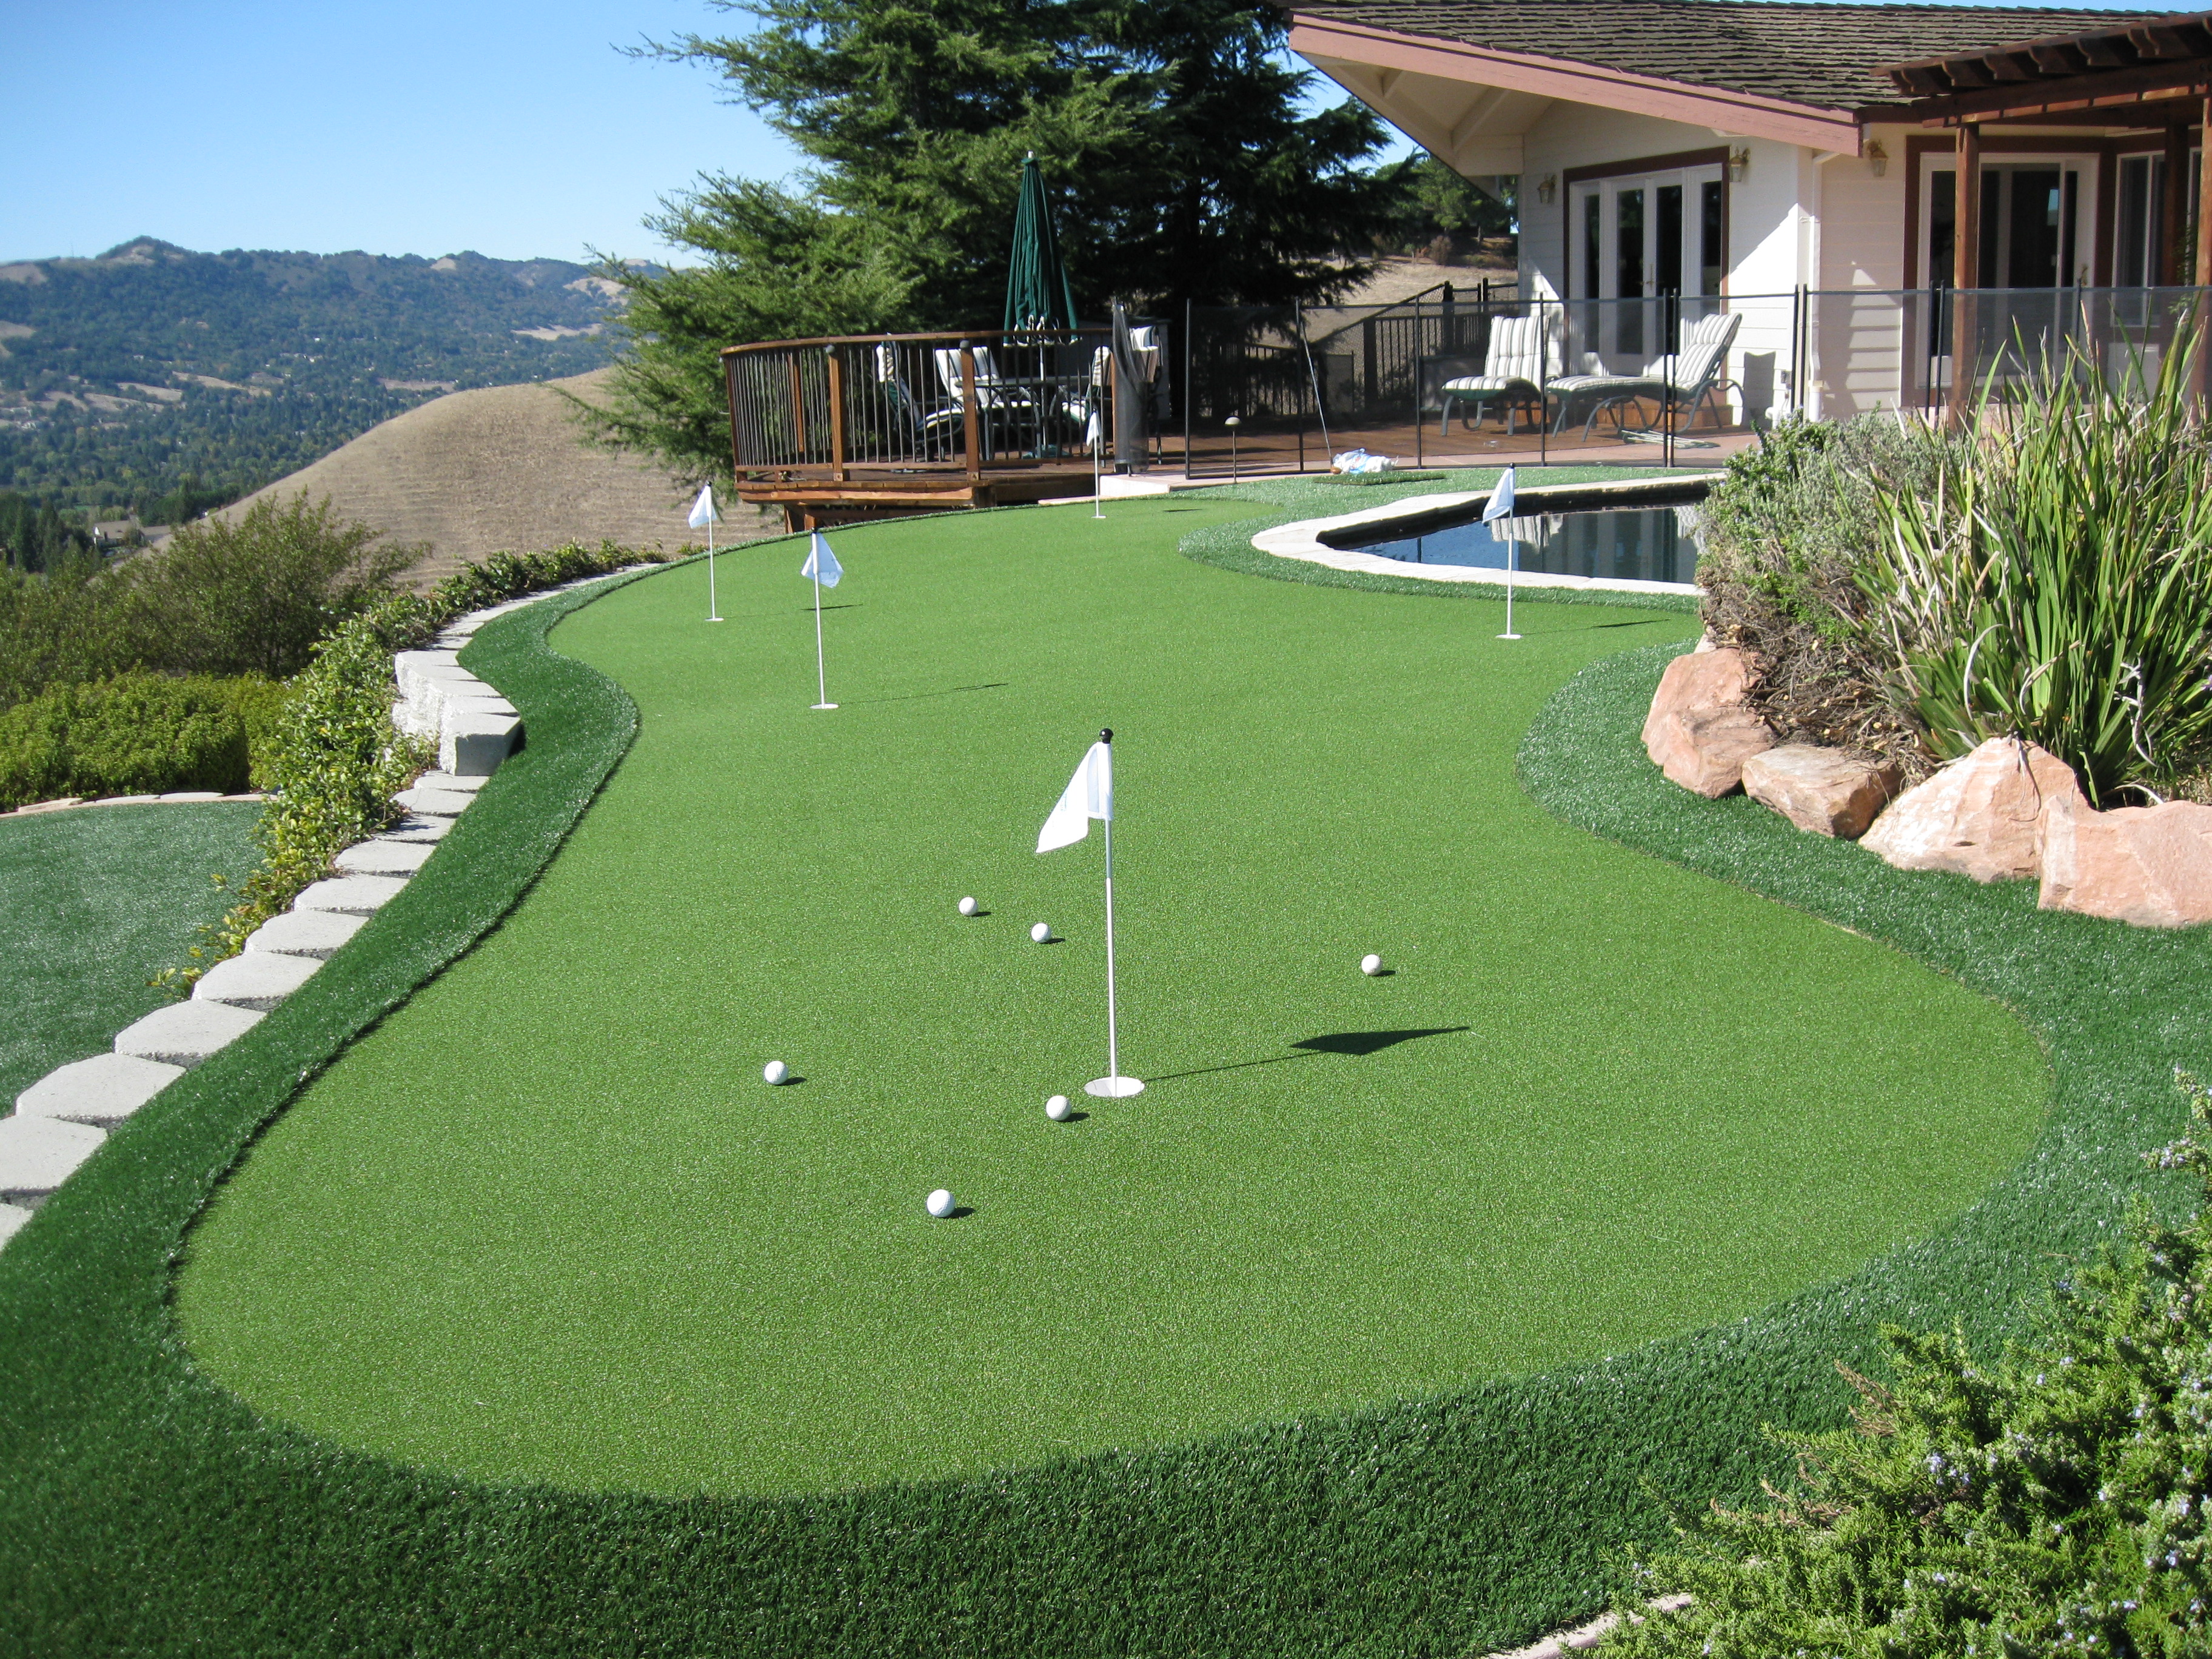 Sharpen Your Stroke With A Backyard Putting Green From PolyGrass